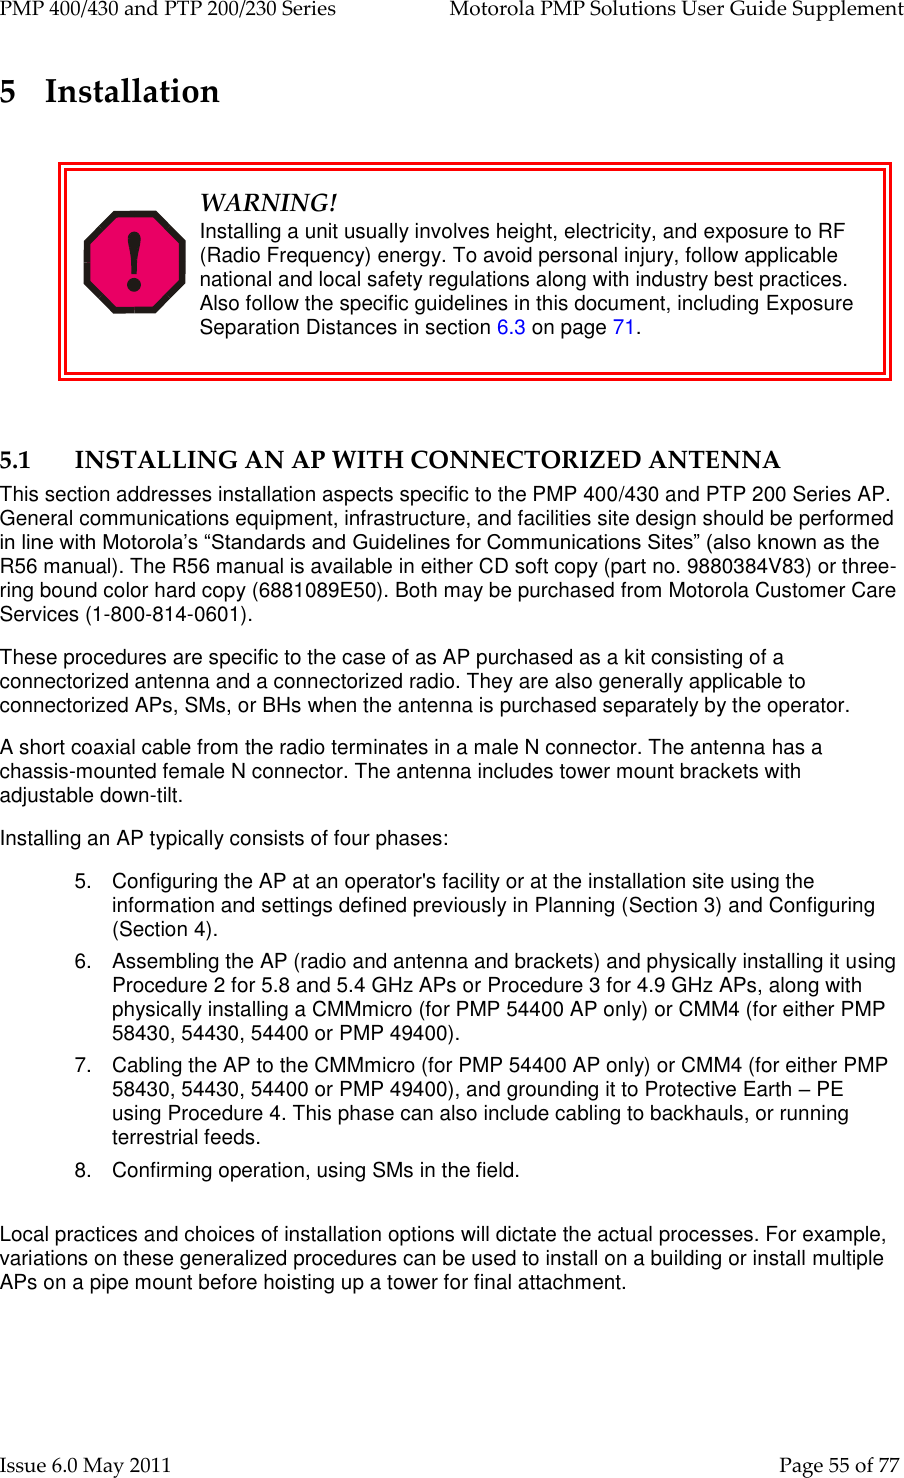 PMP 400/430 and PTP 200/230 Series   Motorola PMP Solutions User Guide Supplement Issue 6.0 May 2011    Page 55 of 77 5 Installation   WARNING! Installing a unit usually involves height, electricity, and exposure to RF (Radio Frequency) energy. To avoid personal injury, follow applicable national and local safety regulations along with industry best practices. Also follow the specific guidelines in this document, including Exposure Separation Distances in section 6.3 on page 71.  5.1 INSTALLING AN AP WITH CONNECTORIZED ANTENNA This section addresses installation aspects specific to the PMP 400/430 and PTP 200 Series AP. General communications equipment, infrastructure, and facilities site design should be performed in line with Motorola’s “Standards and Guidelines for Communications Sites” (also known as the R56 manual). The R56 manual is available in either CD soft copy (part no. 9880384V83) or three-ring bound color hard copy (6881089E50). Both may be purchased from Motorola Customer Care Services (1-800-814-0601). These procedures are specific to the case of as AP purchased as a kit consisting of a connectorized antenna and a connectorized radio. They are also generally applicable to connectorized APs, SMs, or BHs when the antenna is purchased separately by the operator. A short coaxial cable from the radio terminates in a male N connector. The antenna has a chassis-mounted female N connector. The antenna includes tower mount brackets with adjustable down-tilt. Installing an AP typically consists of four phases: 5.  Configuring the AP at an operator&apos;s facility or at the installation site using the information and settings defined previously in Planning (Section 3) and Configuring (Section 4). 6.  Assembling the AP (radio and antenna and brackets) and physically installing it using Procedure 2 for 5.8 and 5.4 GHz APs or Procedure 3 for 4.9 GHz APs, along with physically installing a CMMmicro (for PMP 54400 AP only) or CMM4 (for either PMP 58430, 54430, 54400 or PMP 49400). 7.  Cabling the AP to the CMMmicro (for PMP 54400 AP only) or CMM4 (for either PMP 58430, 54430, 54400 or PMP 49400), and grounding it to Protective Earth – PE using Procedure 4. This phase can also include cabling to backhauls, or running terrestrial feeds. 8.  Confirming operation, using SMs in the field.  Local practices and choices of installation options will dictate the actual processes. For example, variations on these generalized procedures can be used to install on a building or install multiple APs on a pipe mount before hoisting up a tower for final attachment.  